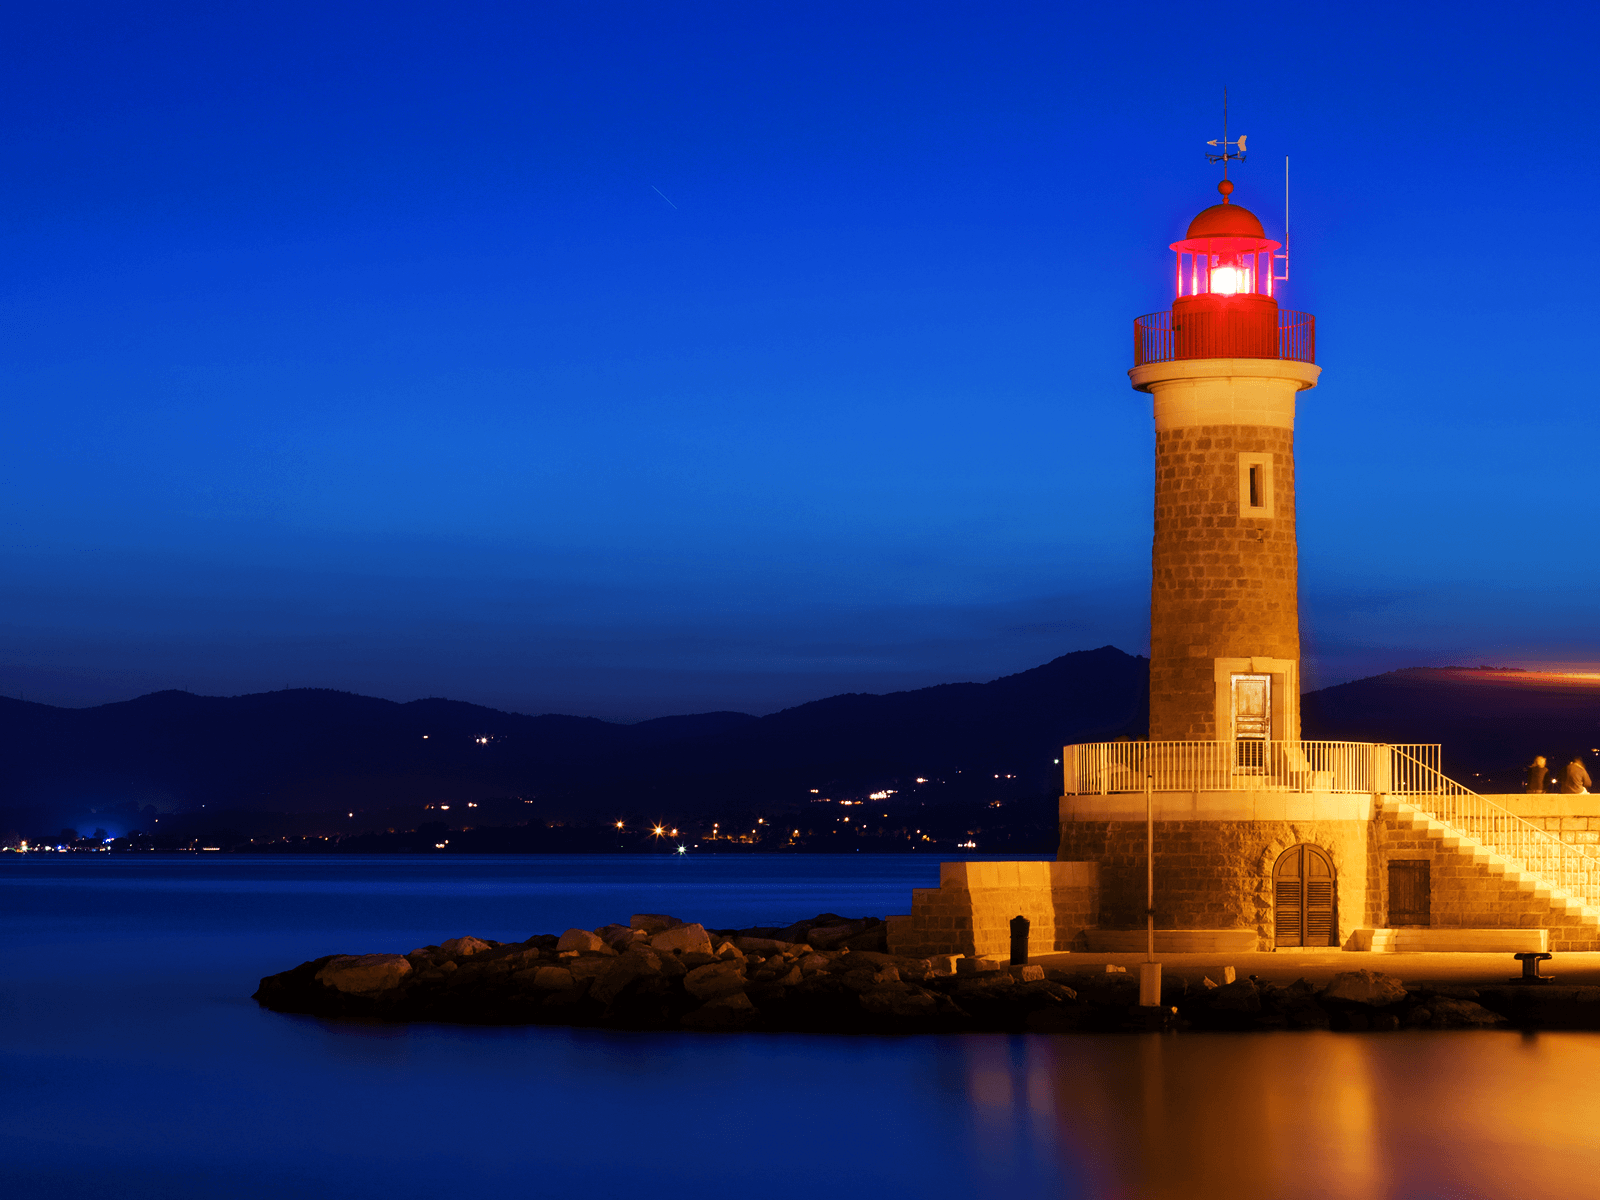 Wallpaper.wiki Lighthouse HD Background PIC WPE007280